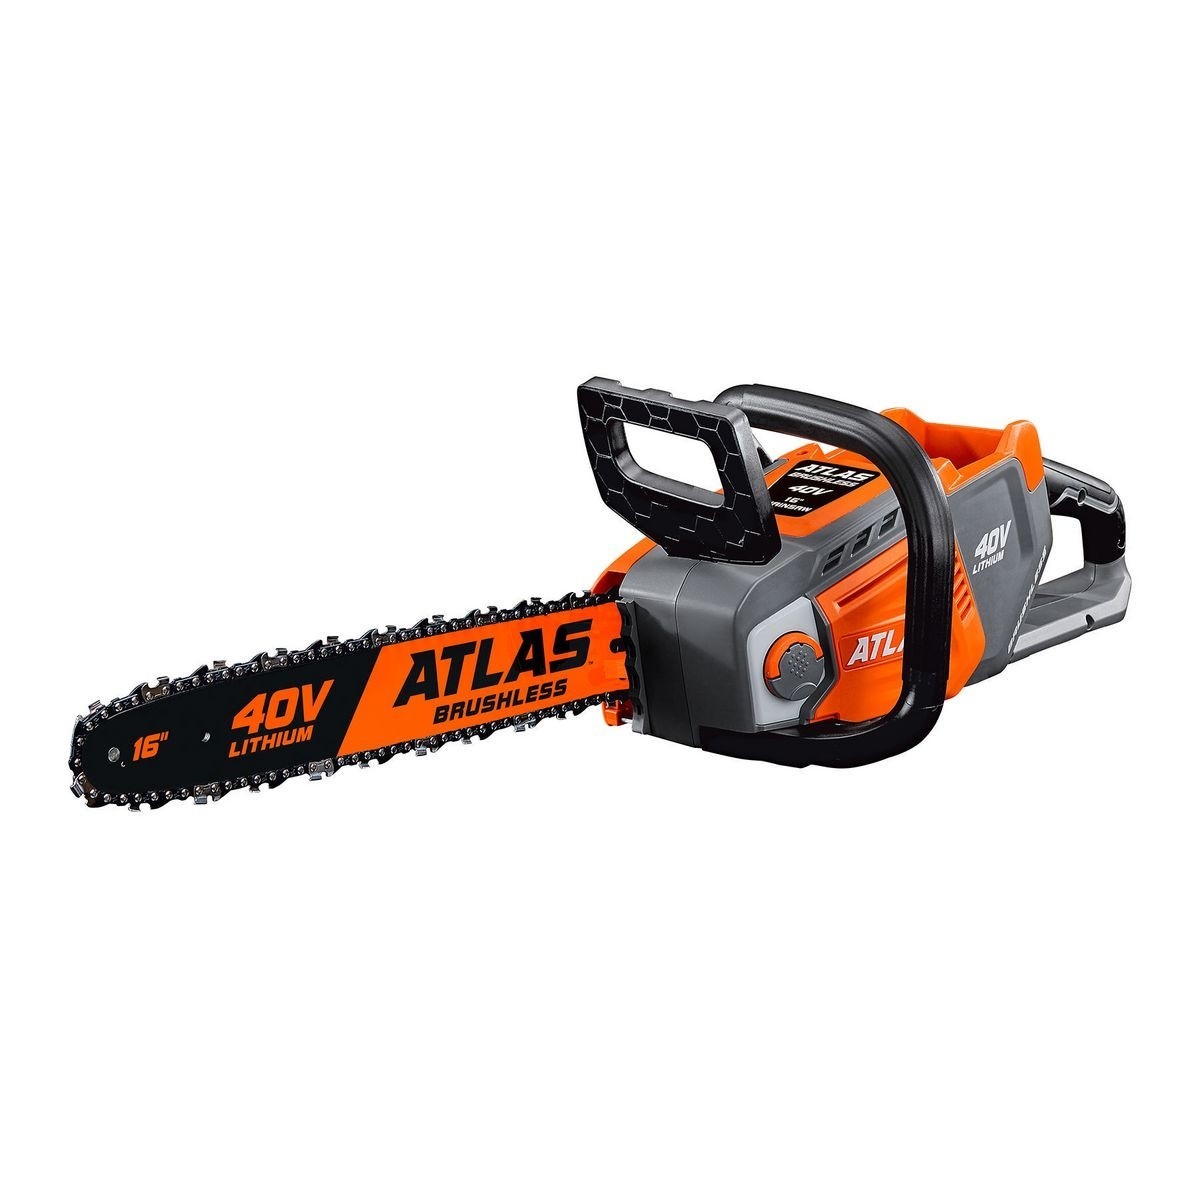 Atlas 40V Lithium-Ion Cordless 16 In. Brushless Chainsaw - Tool Only